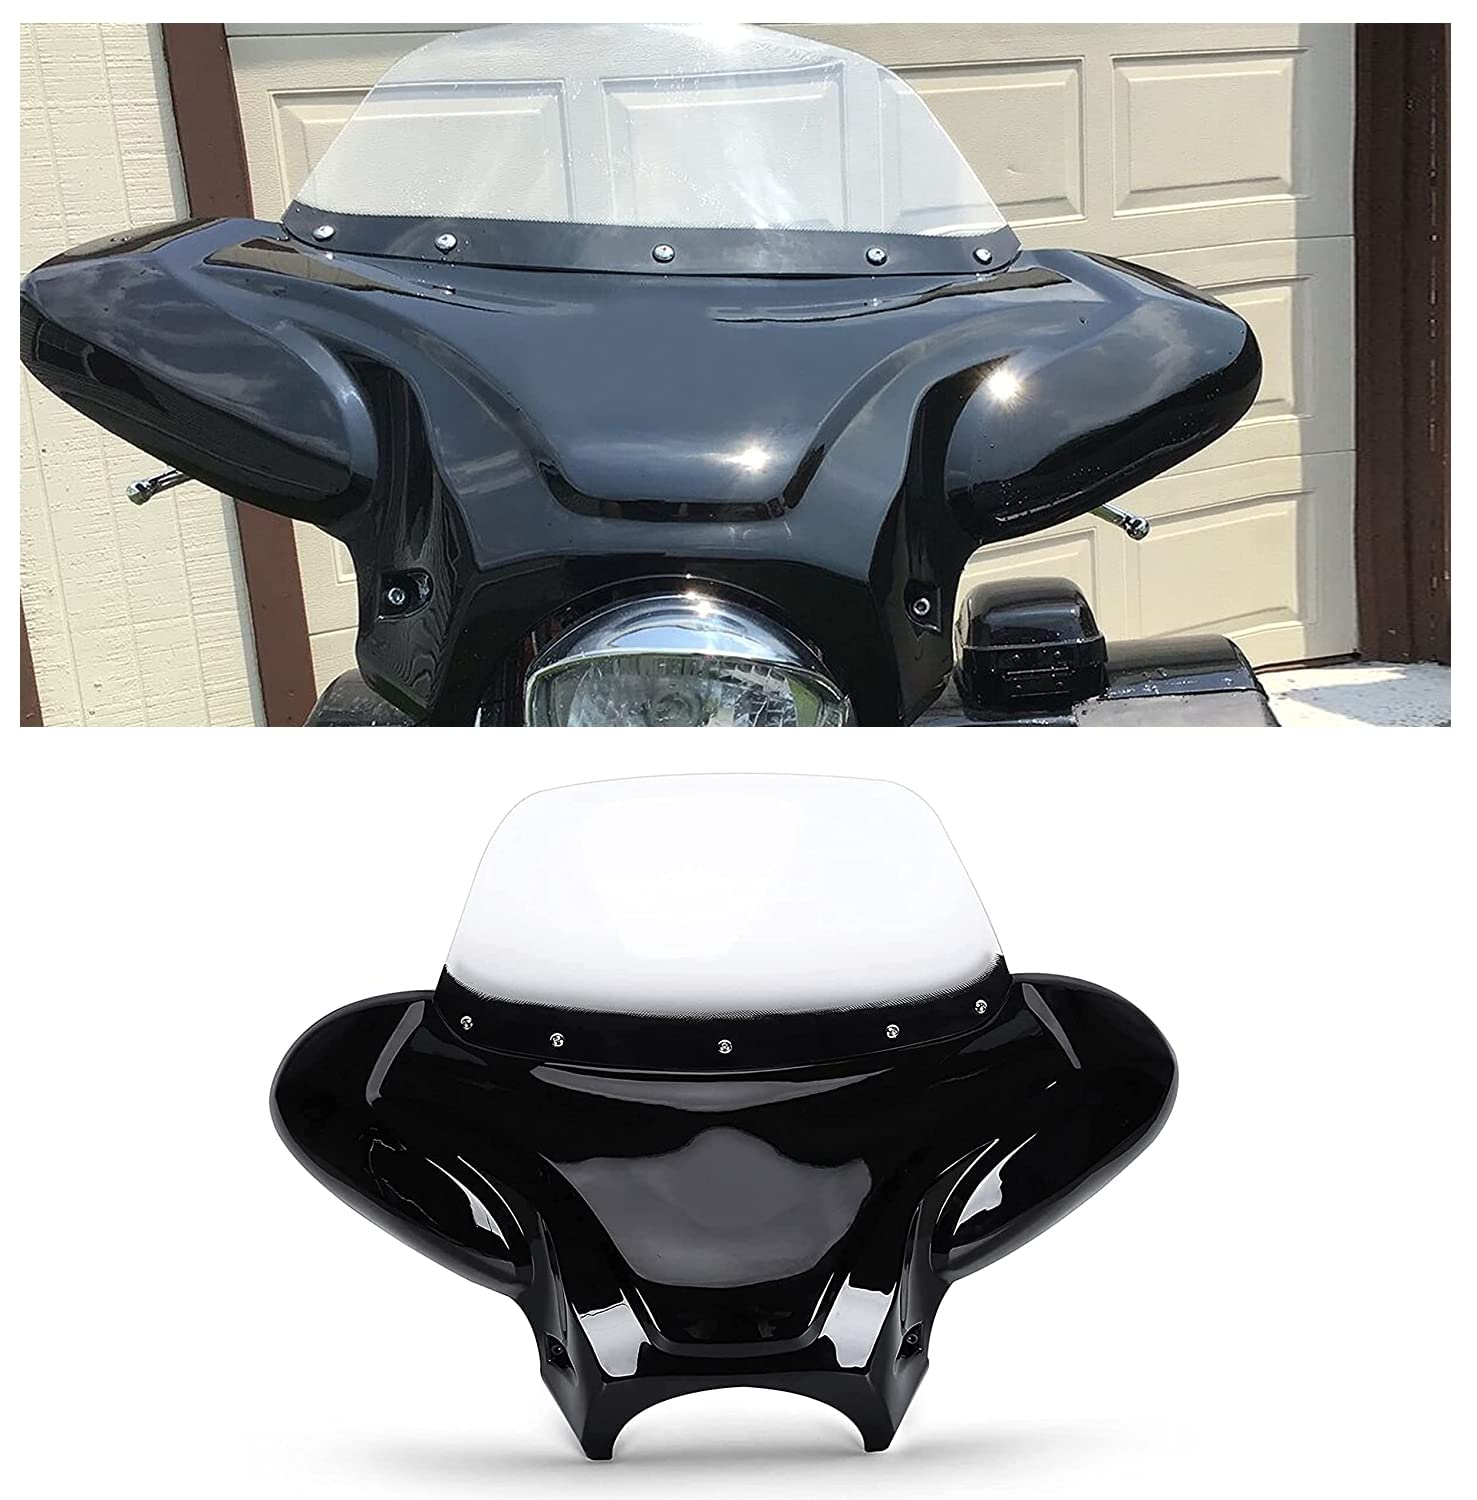 fairing on a motorcycle